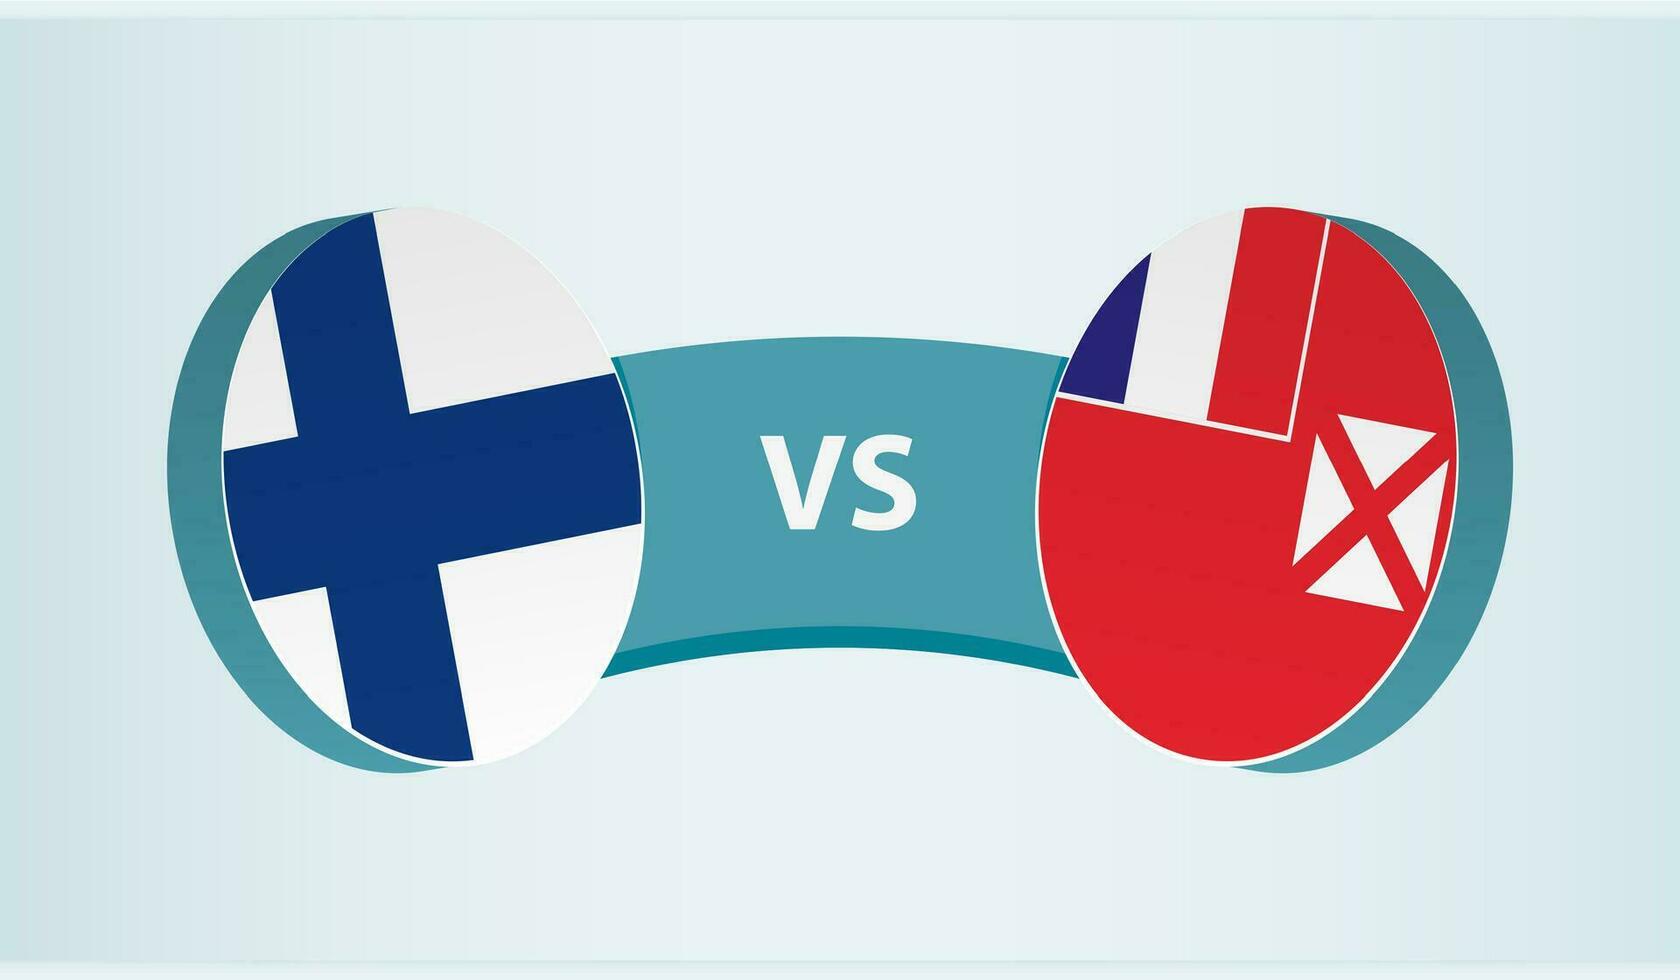 Finland versus Wallis and Futuna, team sports competition concept. vector